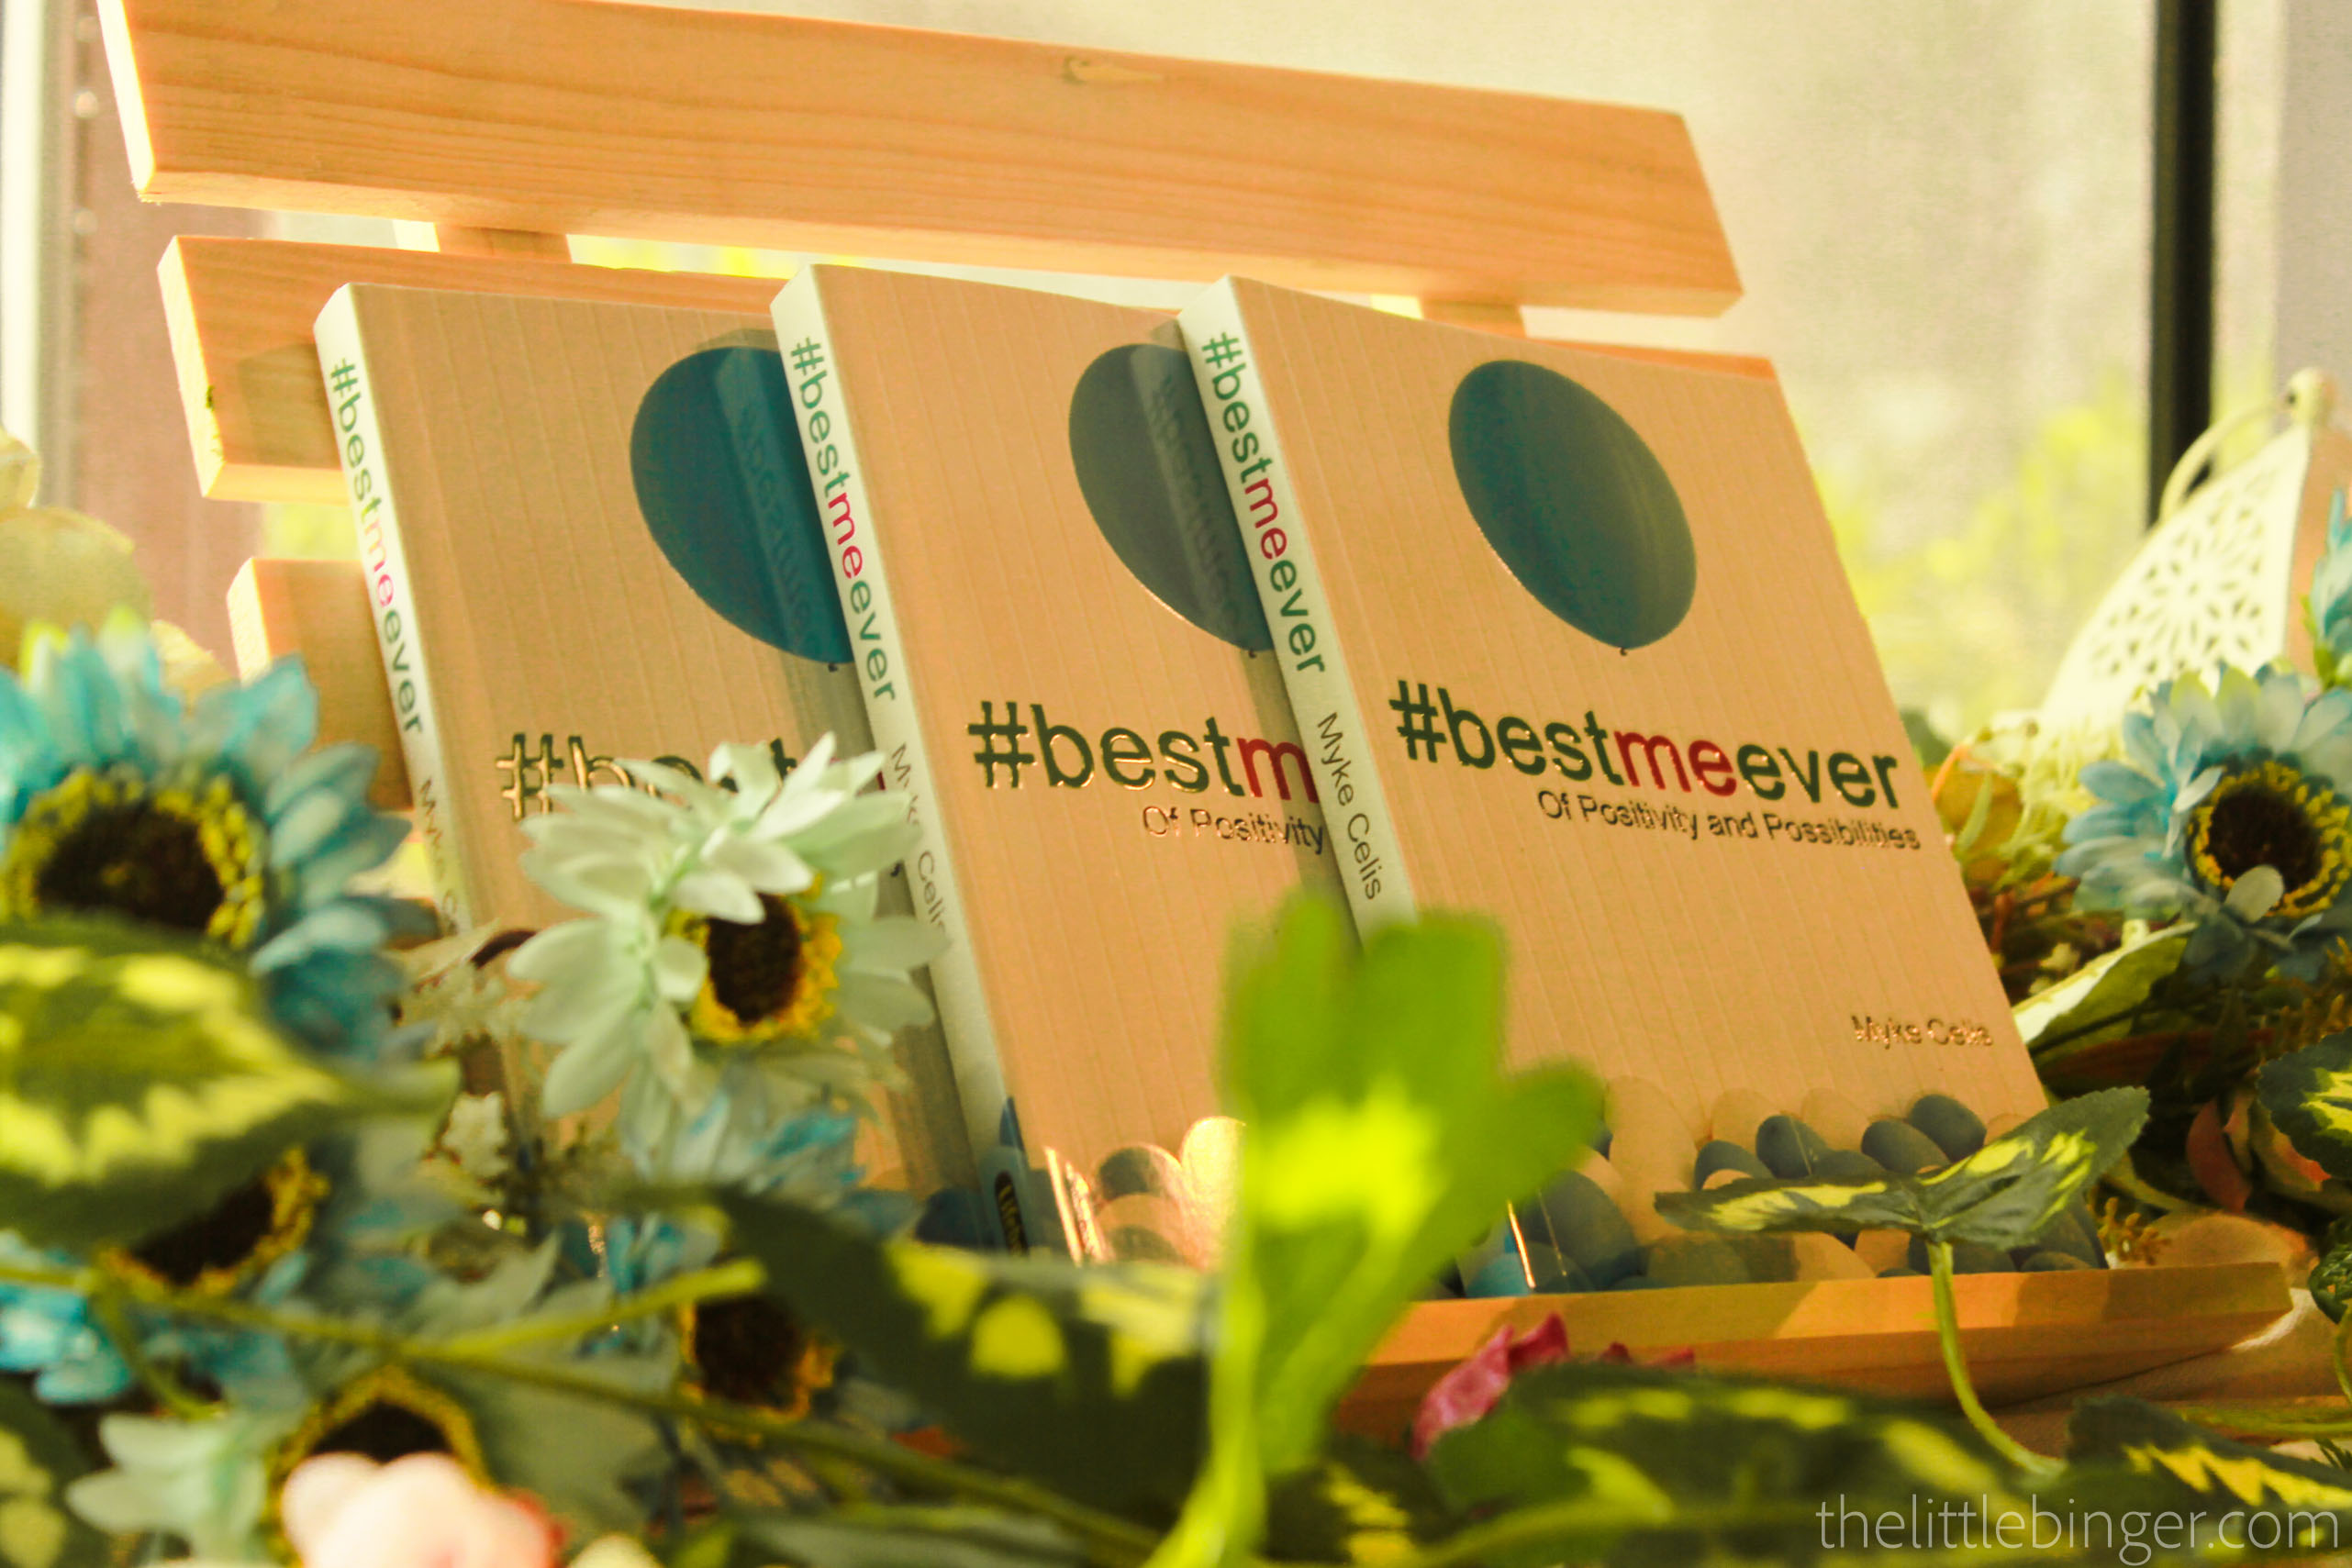 #BestMeEver is now available in bookstores nationwide!